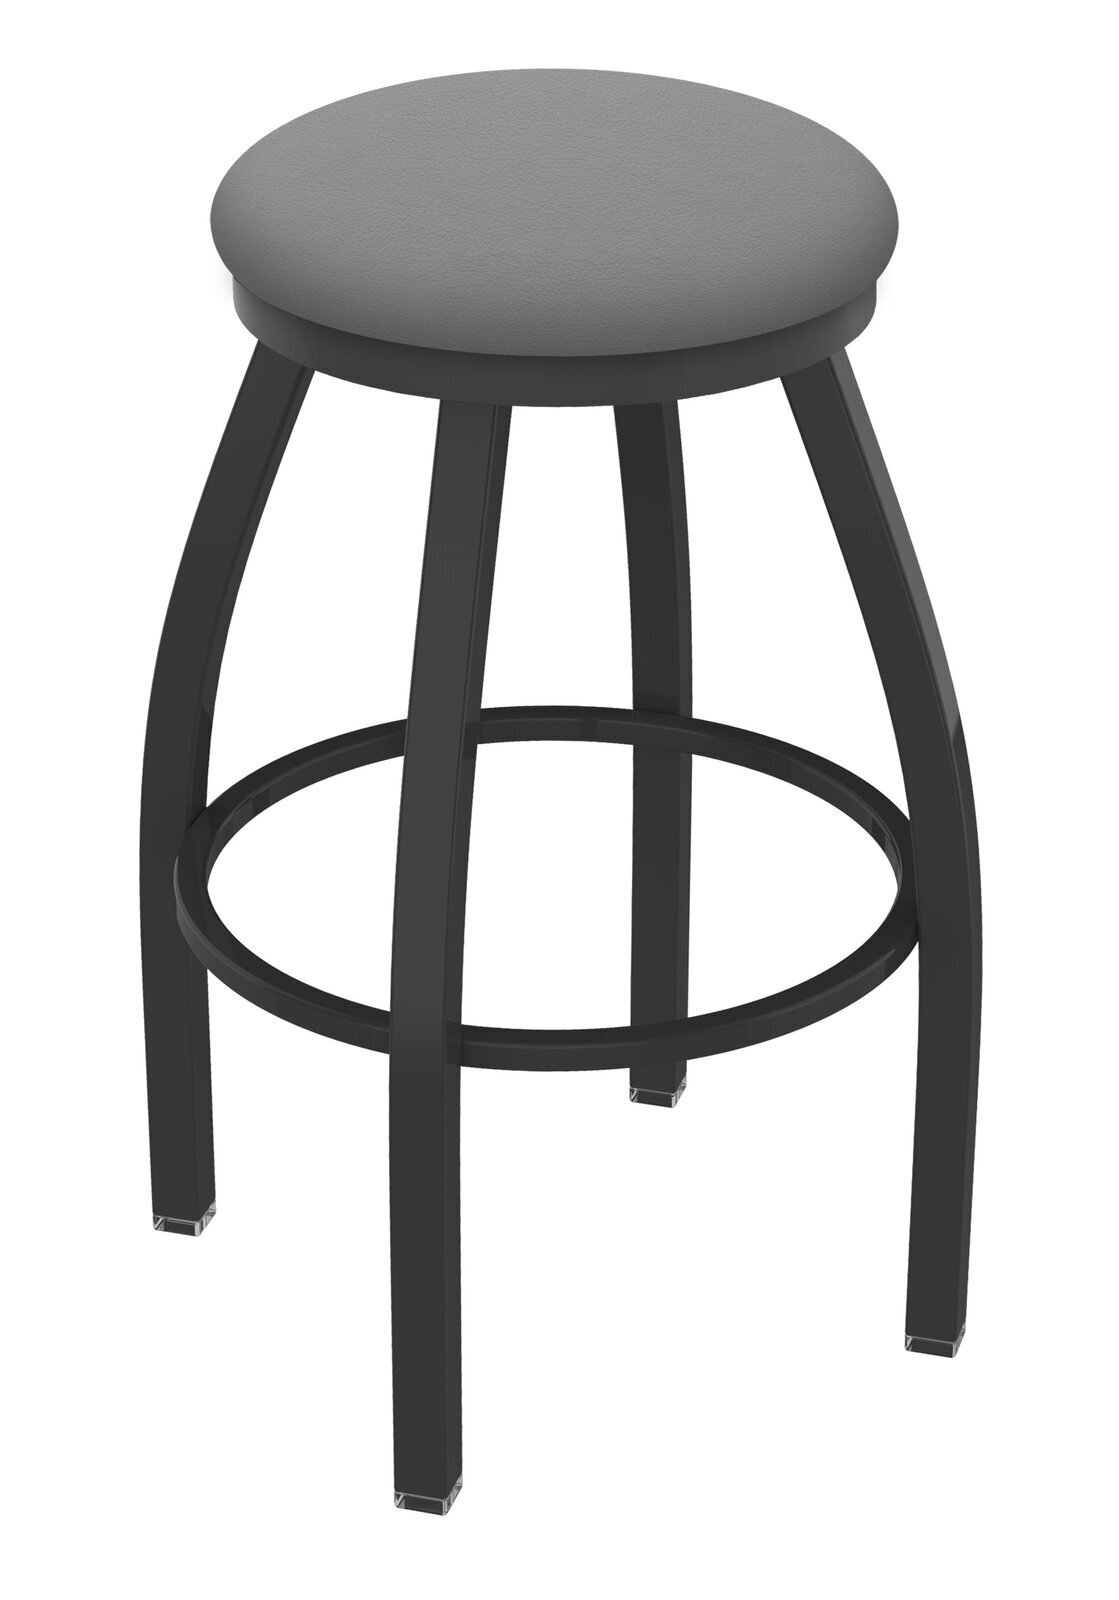 Backless 36 inch seat height bar stools 